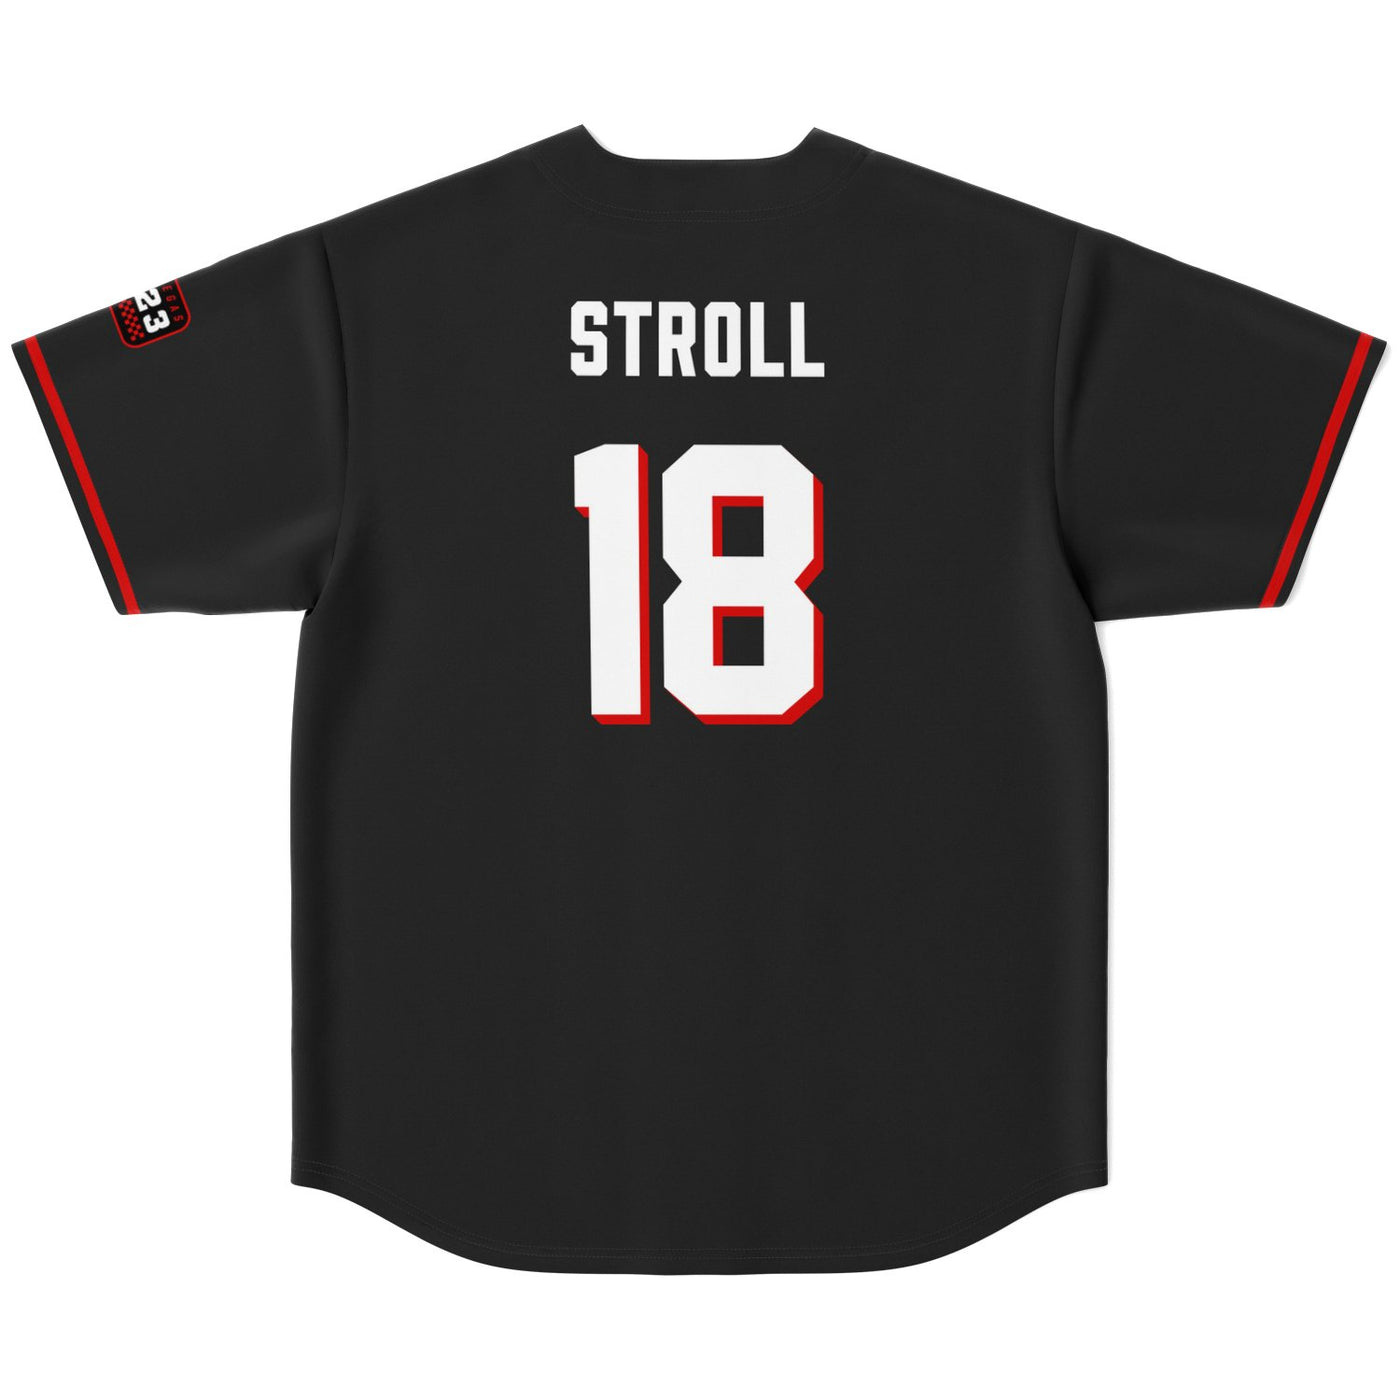 Stroll - Lucky Dice Jersey (Clearance) - Furious Motorsport